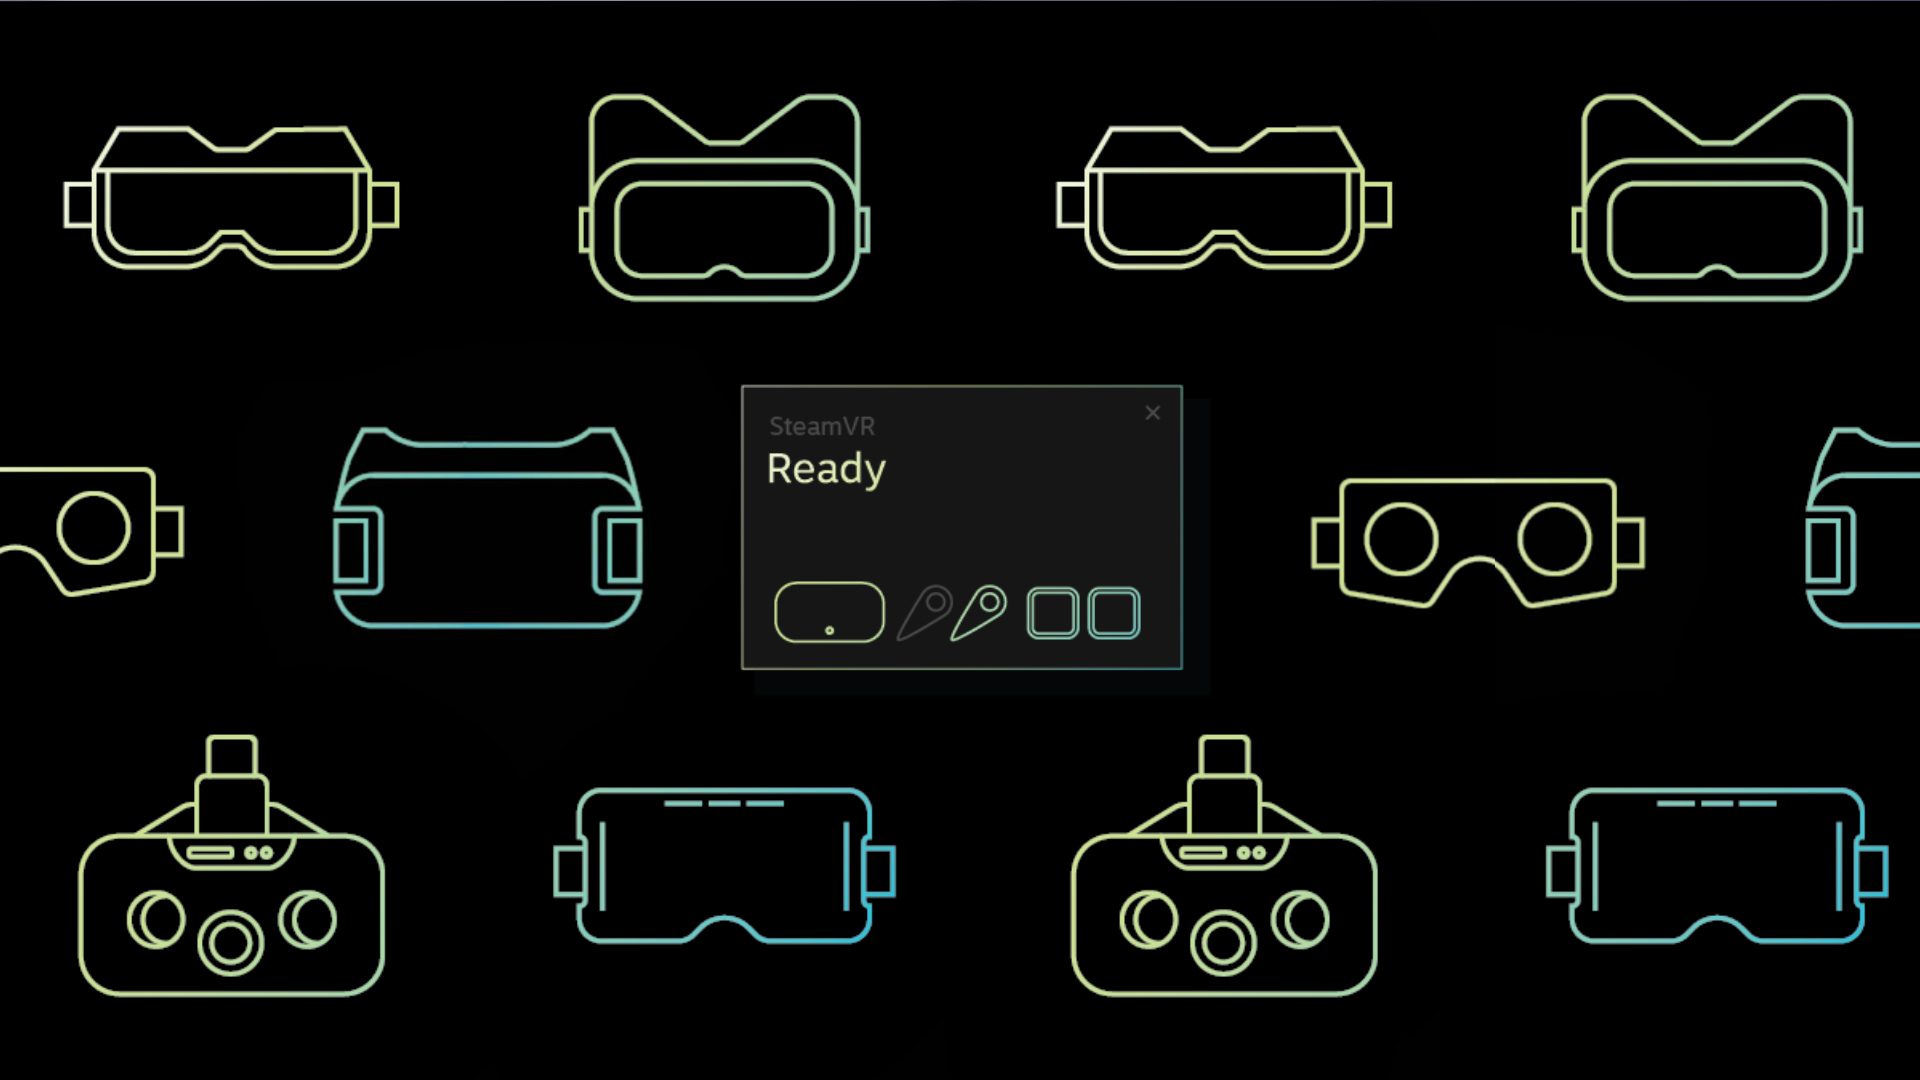 Check if Your PC is VR Ready for Oculus, HTC Vive, Valve Index, & WMR Headsets